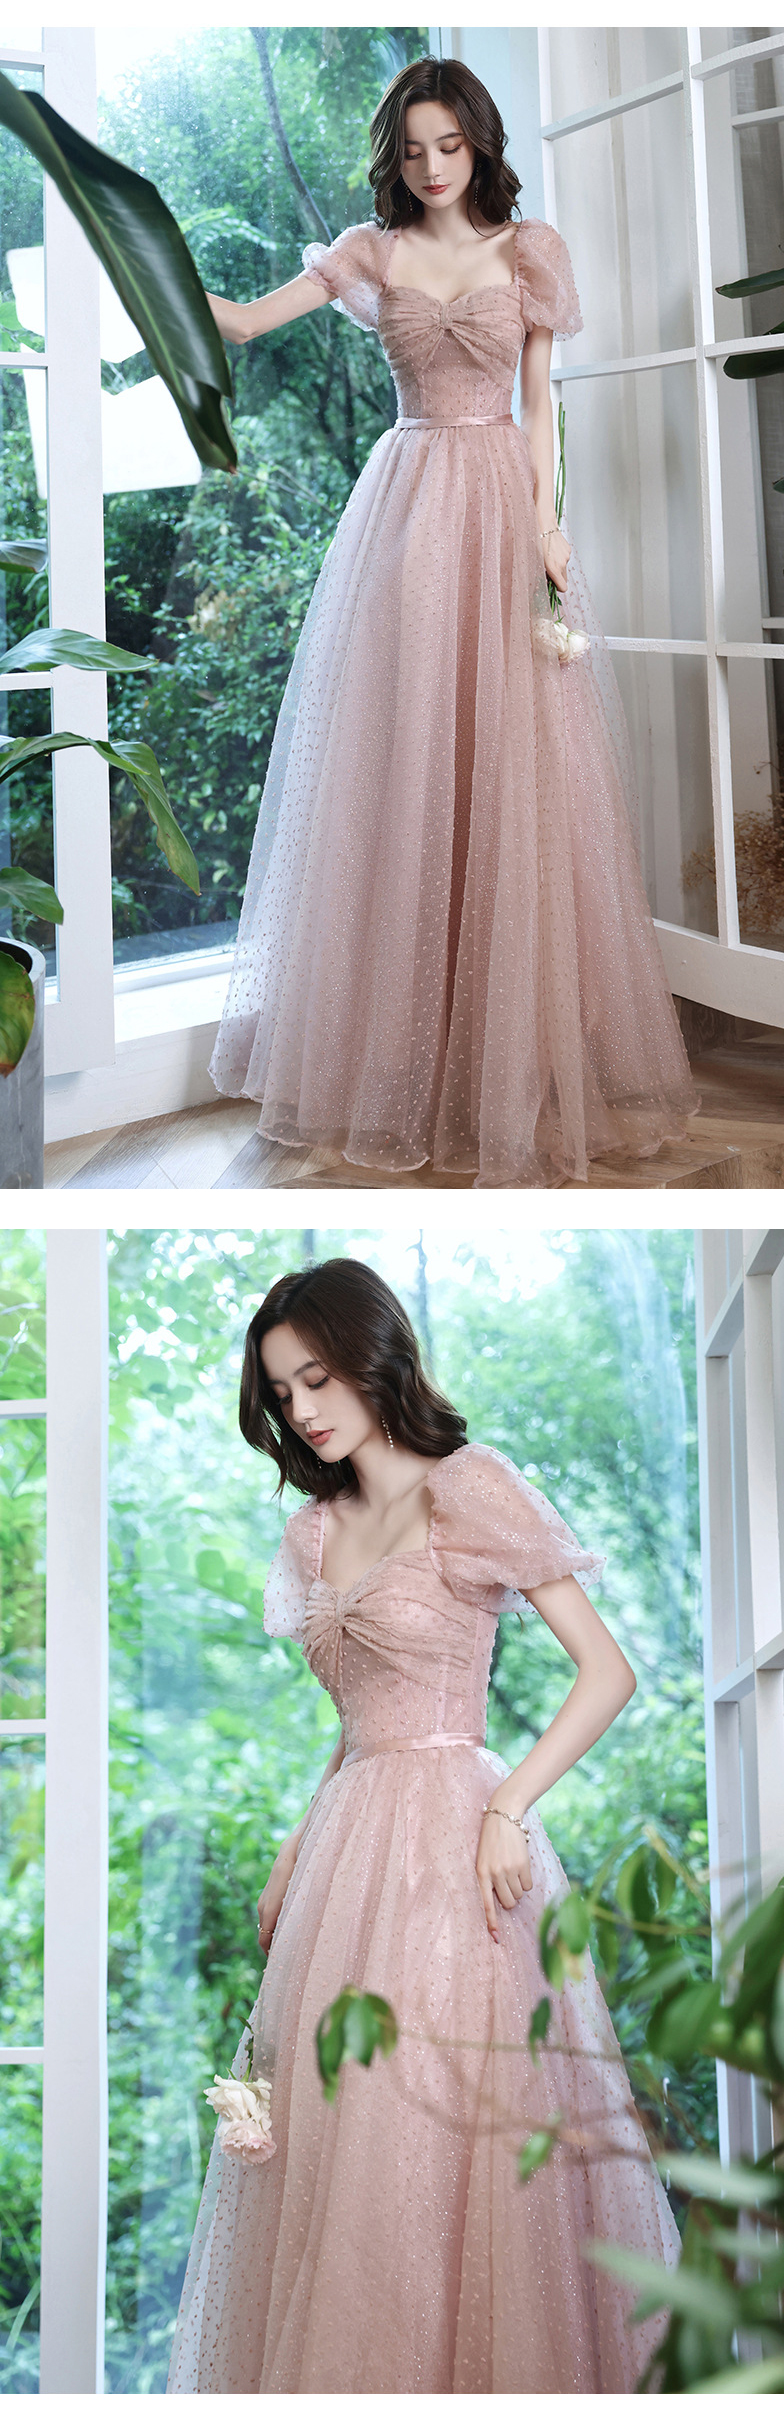 Sweet and Romantic Long Evening Wedding Party Dress16